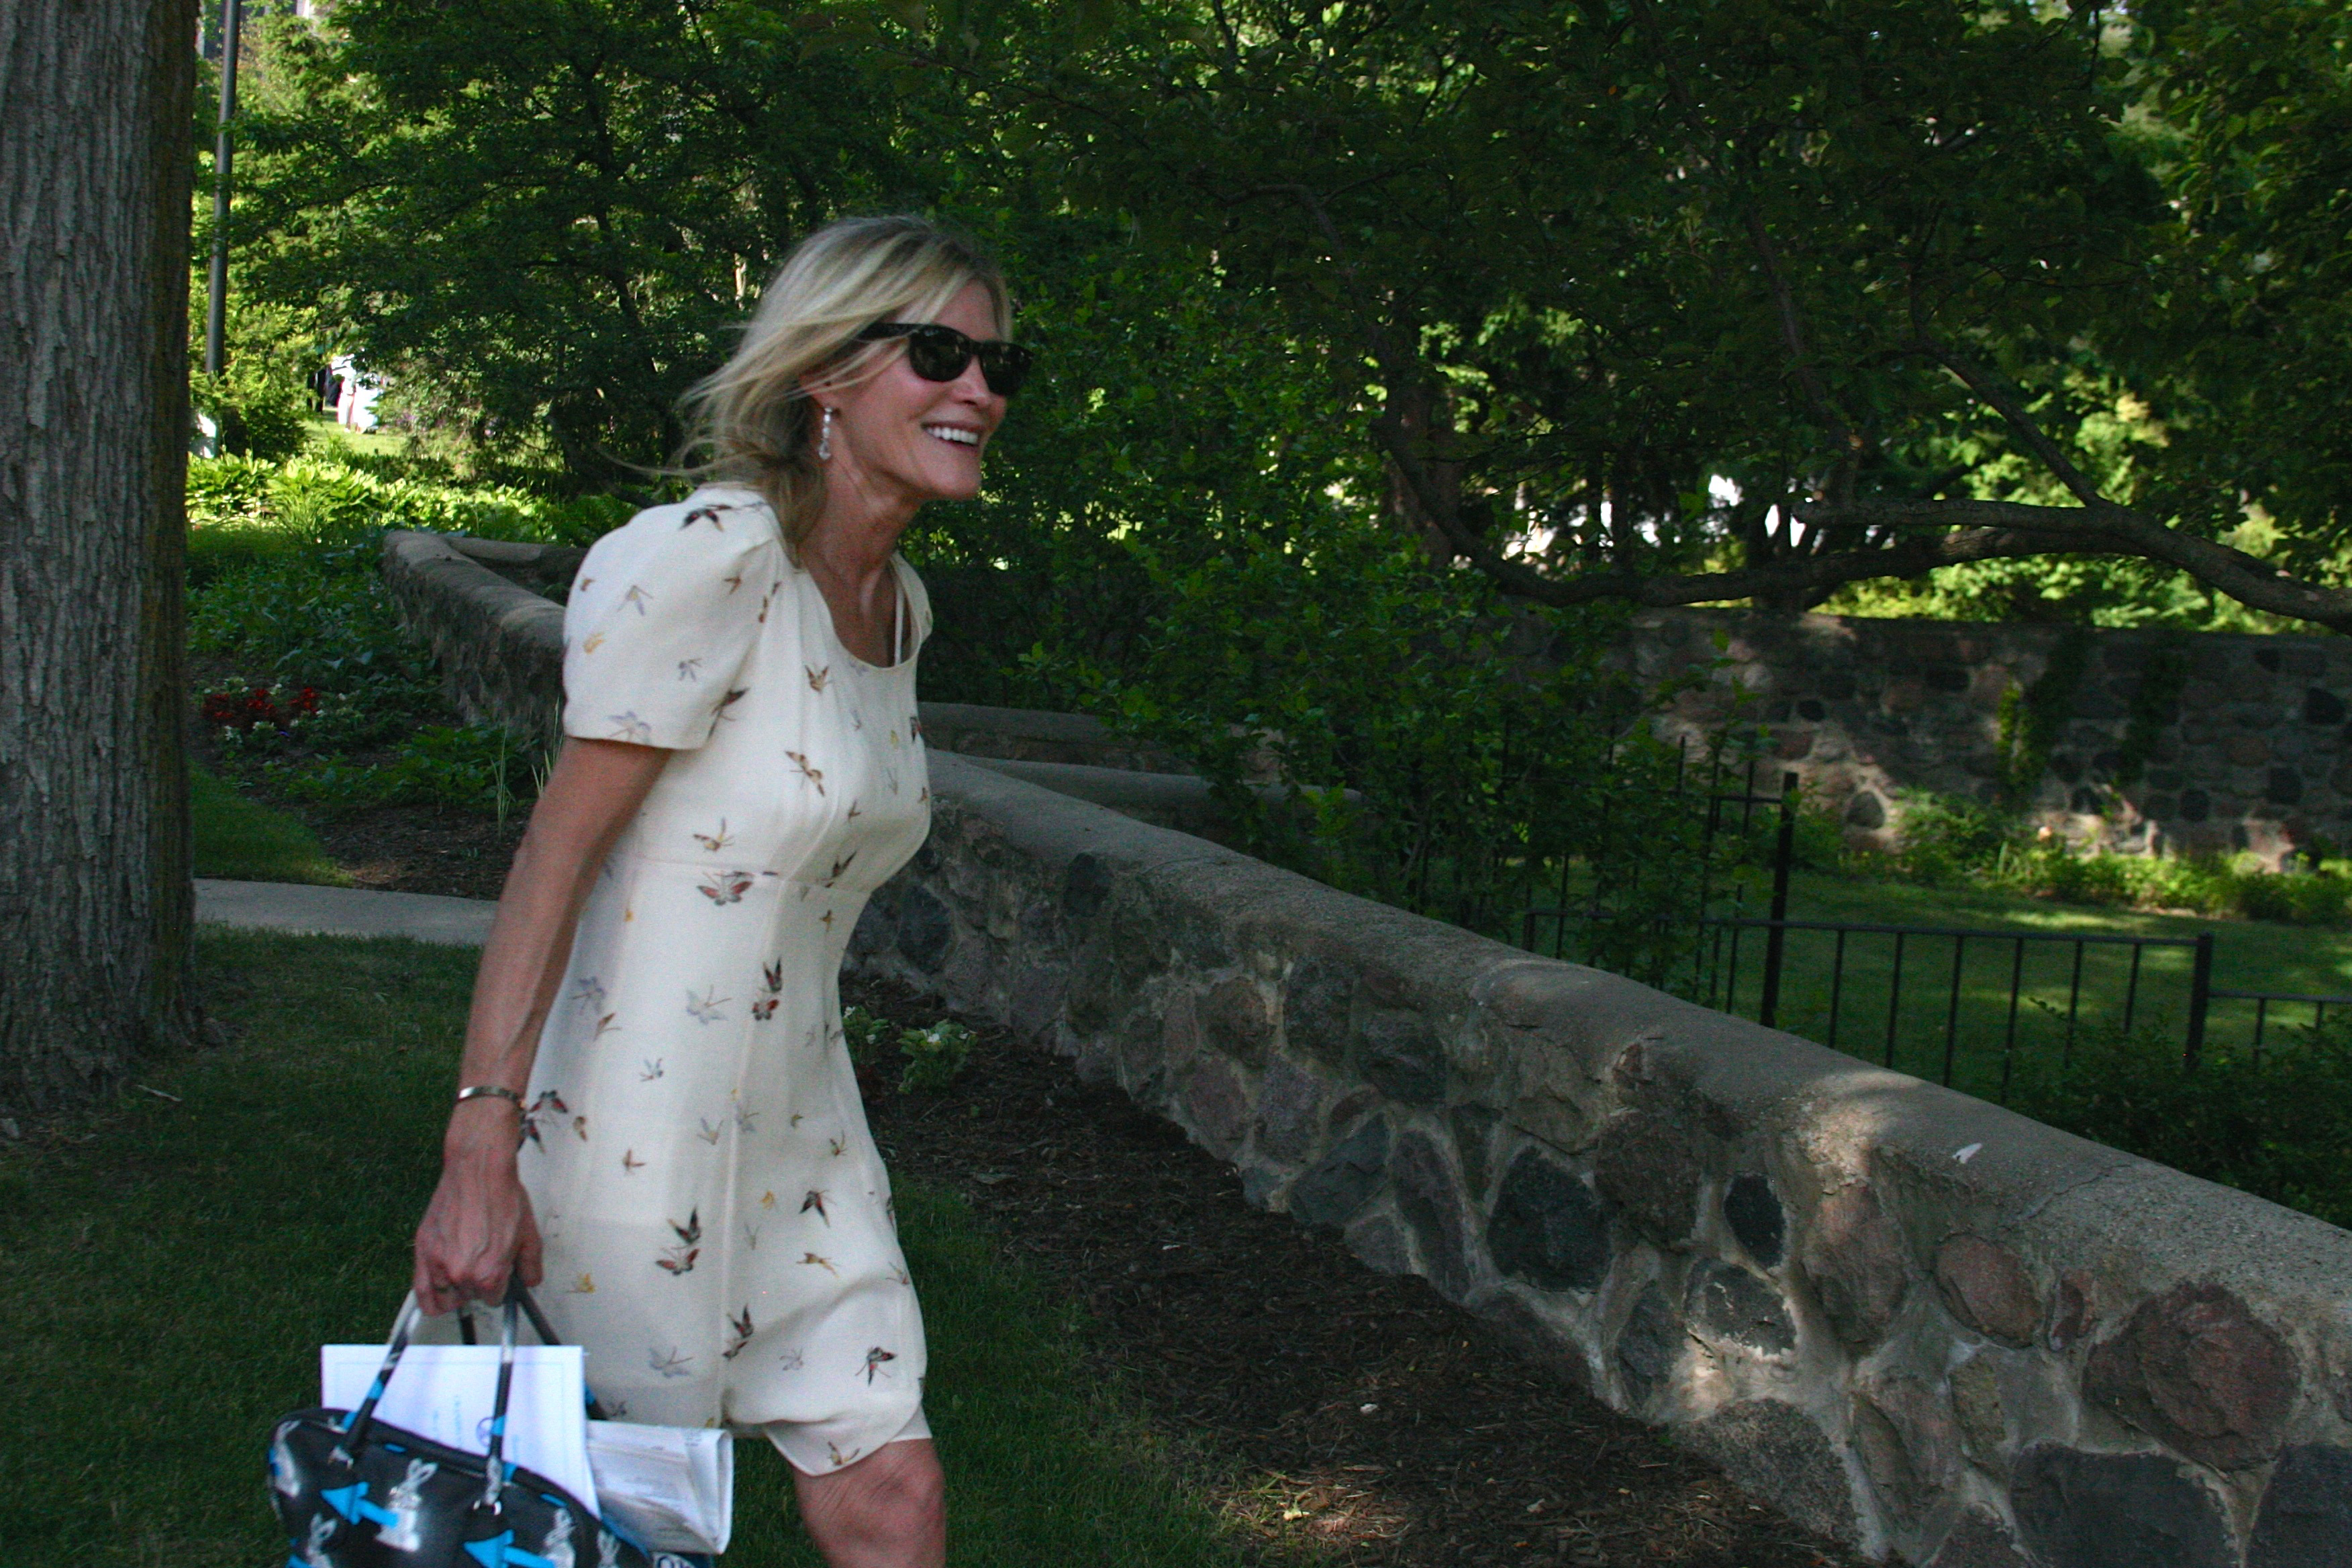 Kogler set against a backdrop of trees, smiling and holding a purse and wearing sunglasses